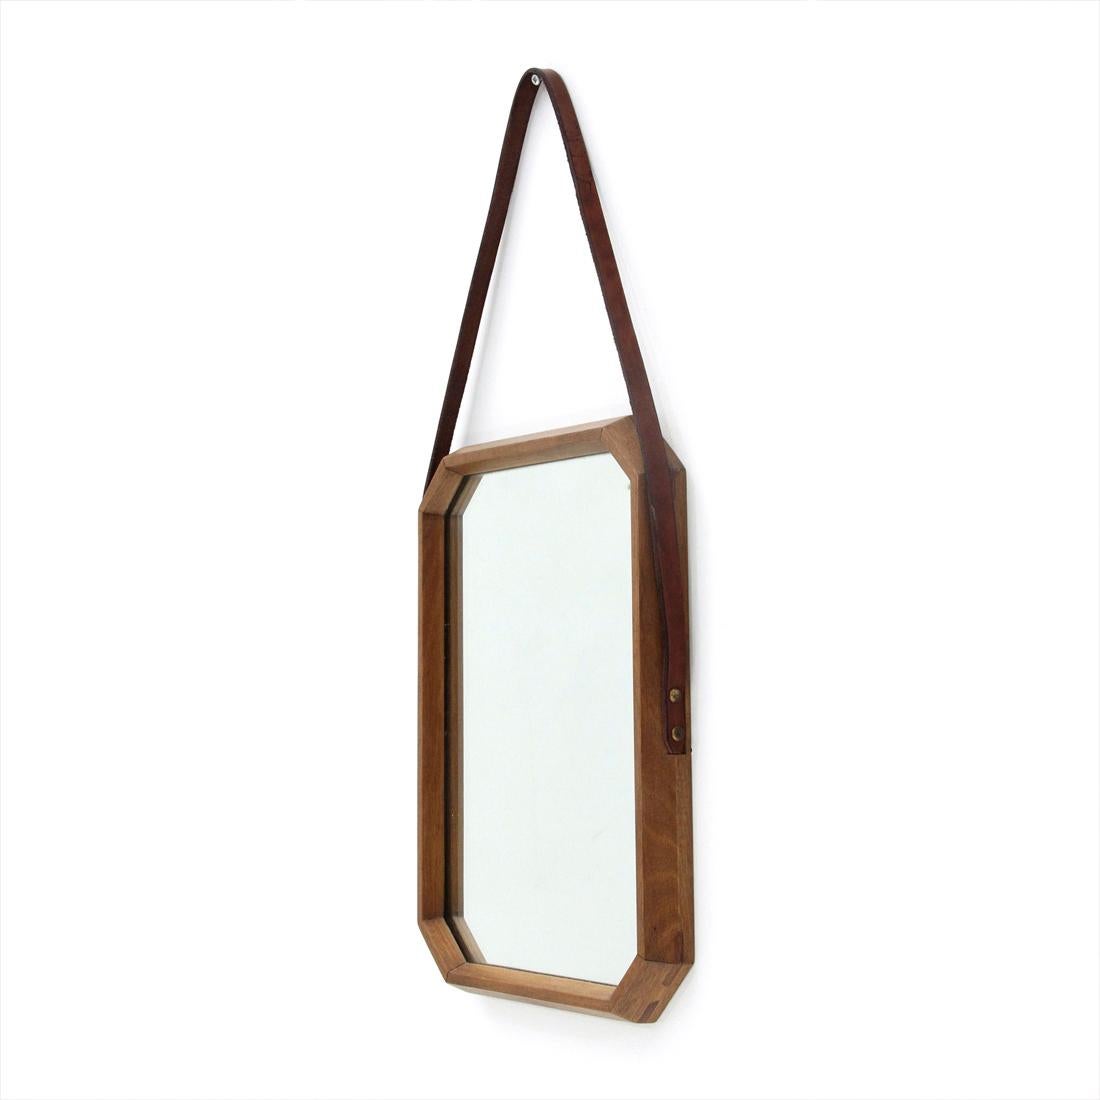 Italian manufacturing mirror produced in the 1960s.
Solid teak frame with faceted edges.
Mirror glass surface.
Leather cord.
Good general condition, some signs due to normal use over time.

Dimensions: Length 28 cm, depth 3 cm, height 39 cm.